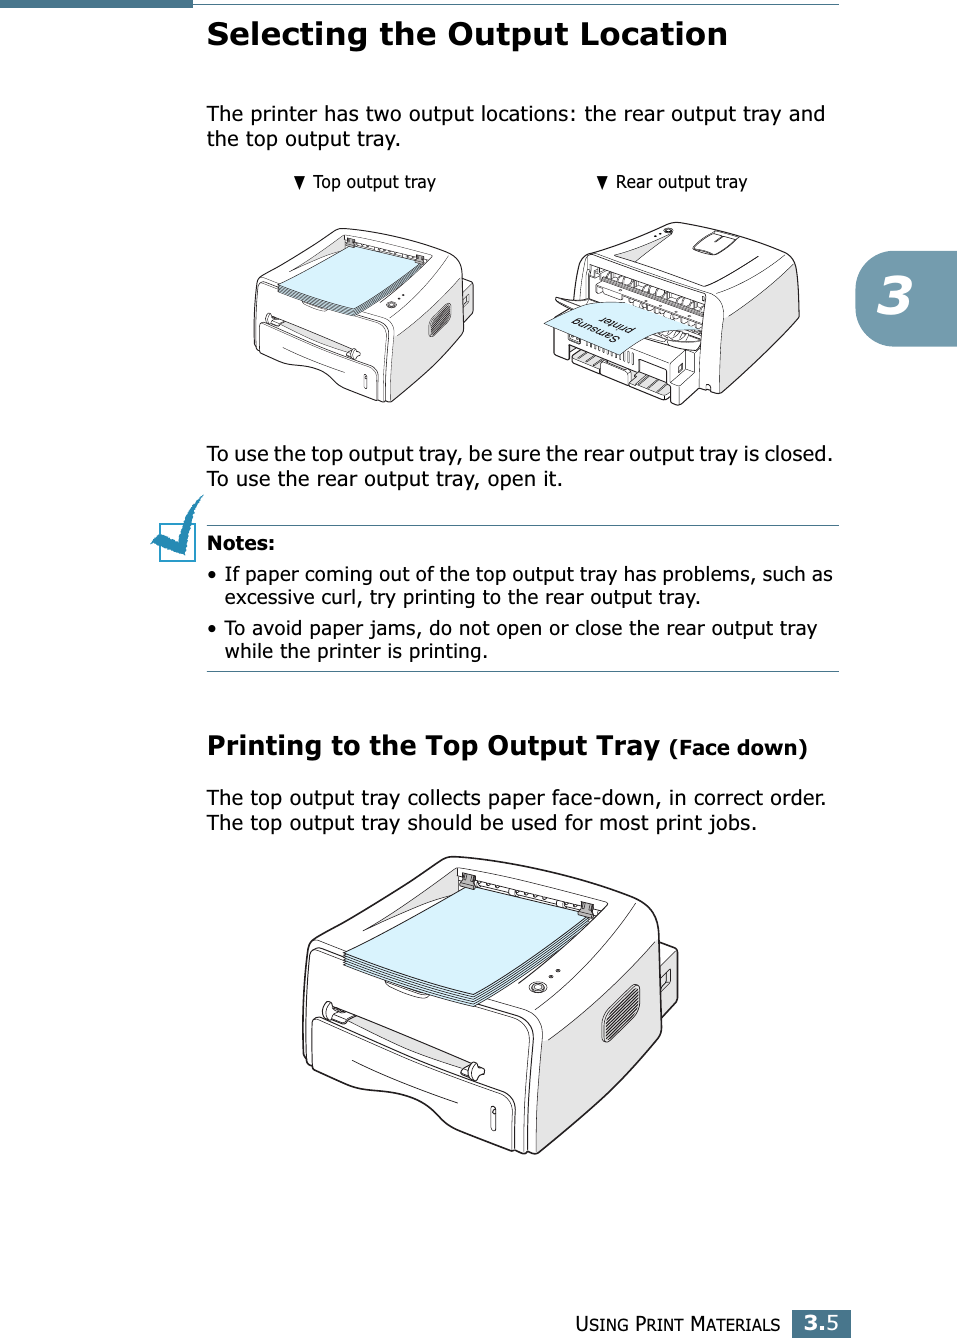 USING PRINT MATERIALS3.53Selecting the Output LocationThe printer has two output locations: the rear output tray and the top output tray. To use the top output tray, be sure the rear output tray is closed. To use the rear output tray, open it.Notes:• If paper coming out of the top output tray has problems, such as excessive curl, try printing to the rear output tray.• To avoid paper jams, do not open or close the rear output tray while the printer is printing.Printing to the Top Output Tray (Face down)The top output tray collects paper face-down, in correct order. The top output tray should be used for most print jobs.❷ Top output tray ❷ Rear output tray